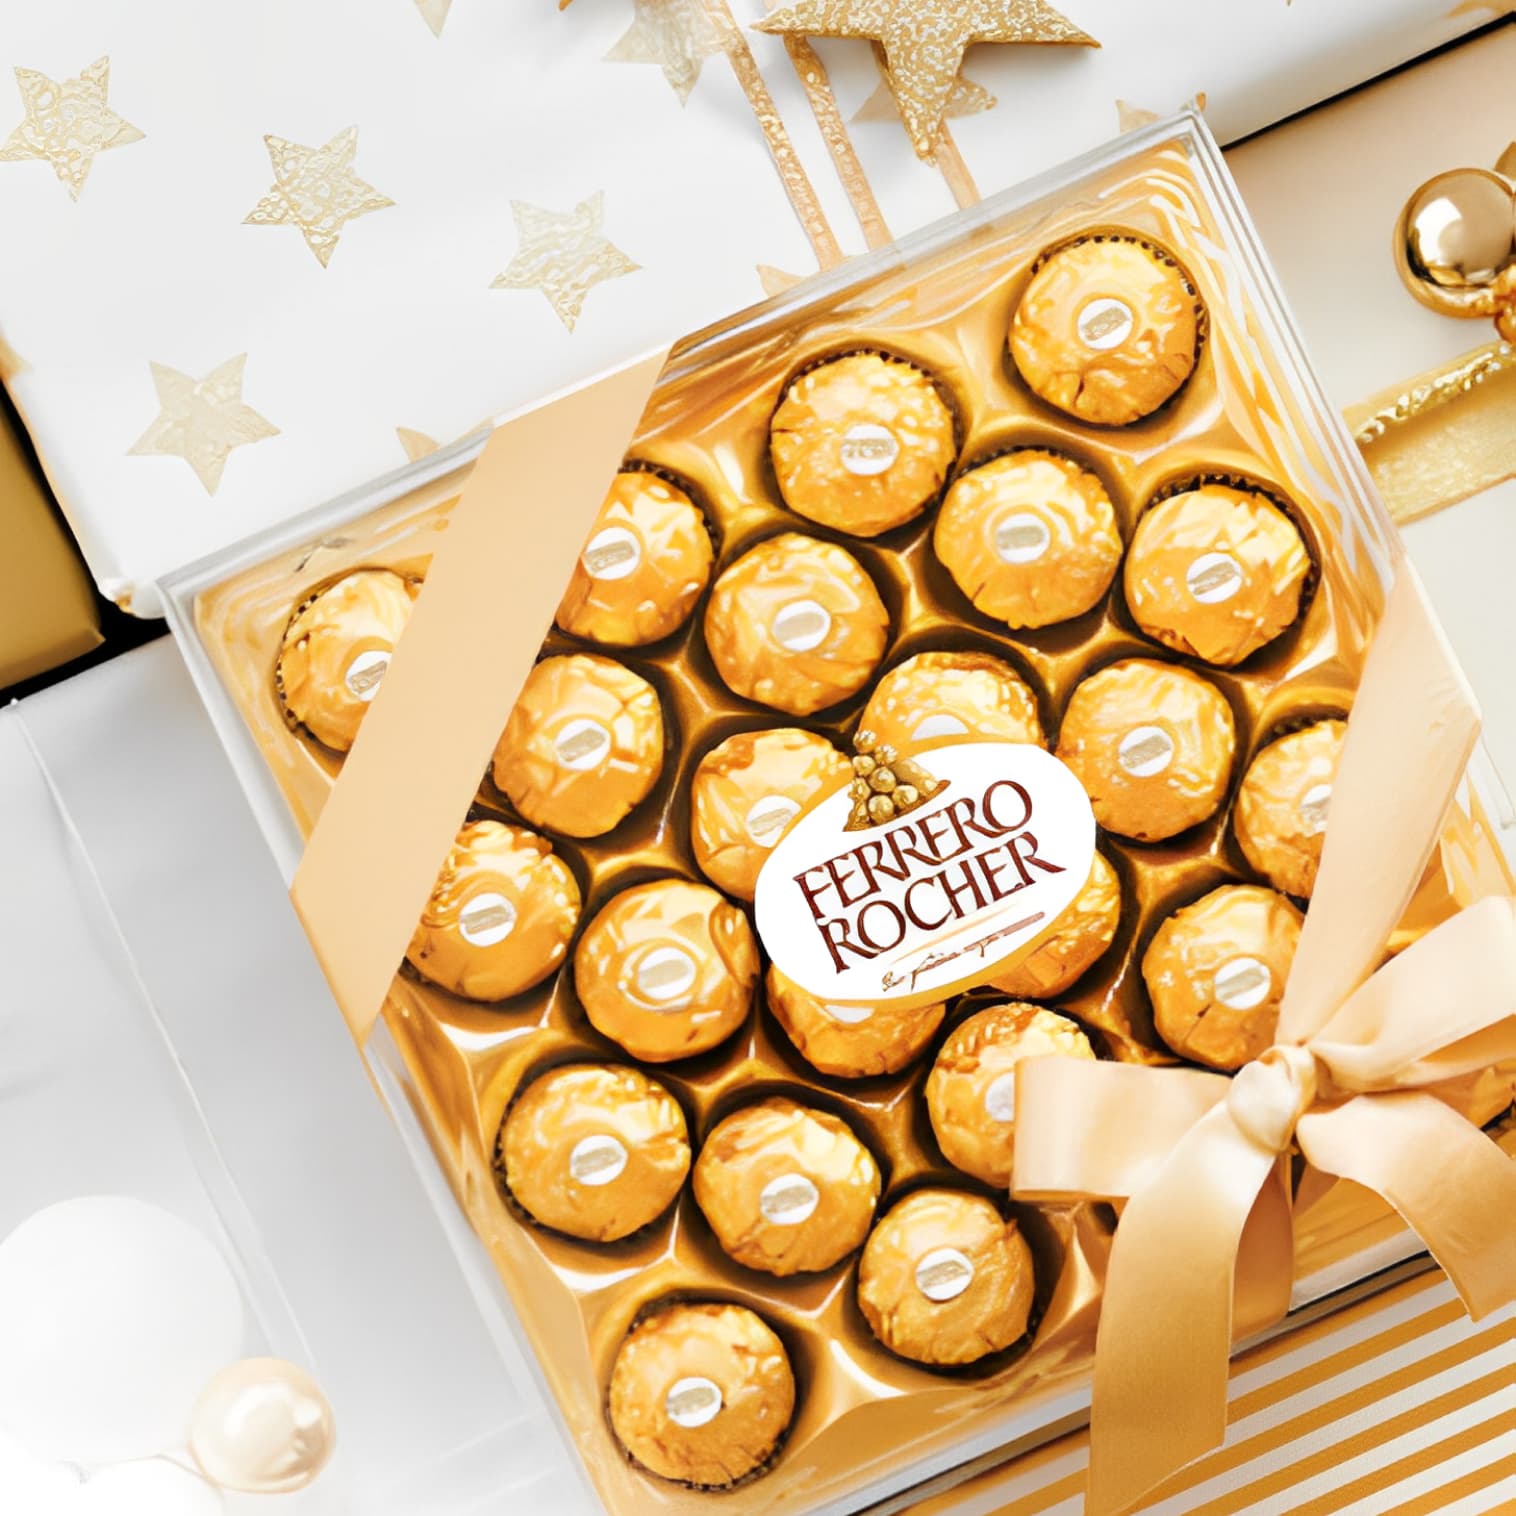 A close-up of the Ferrero symbol, which is golden pralines in a transparent elegant box.